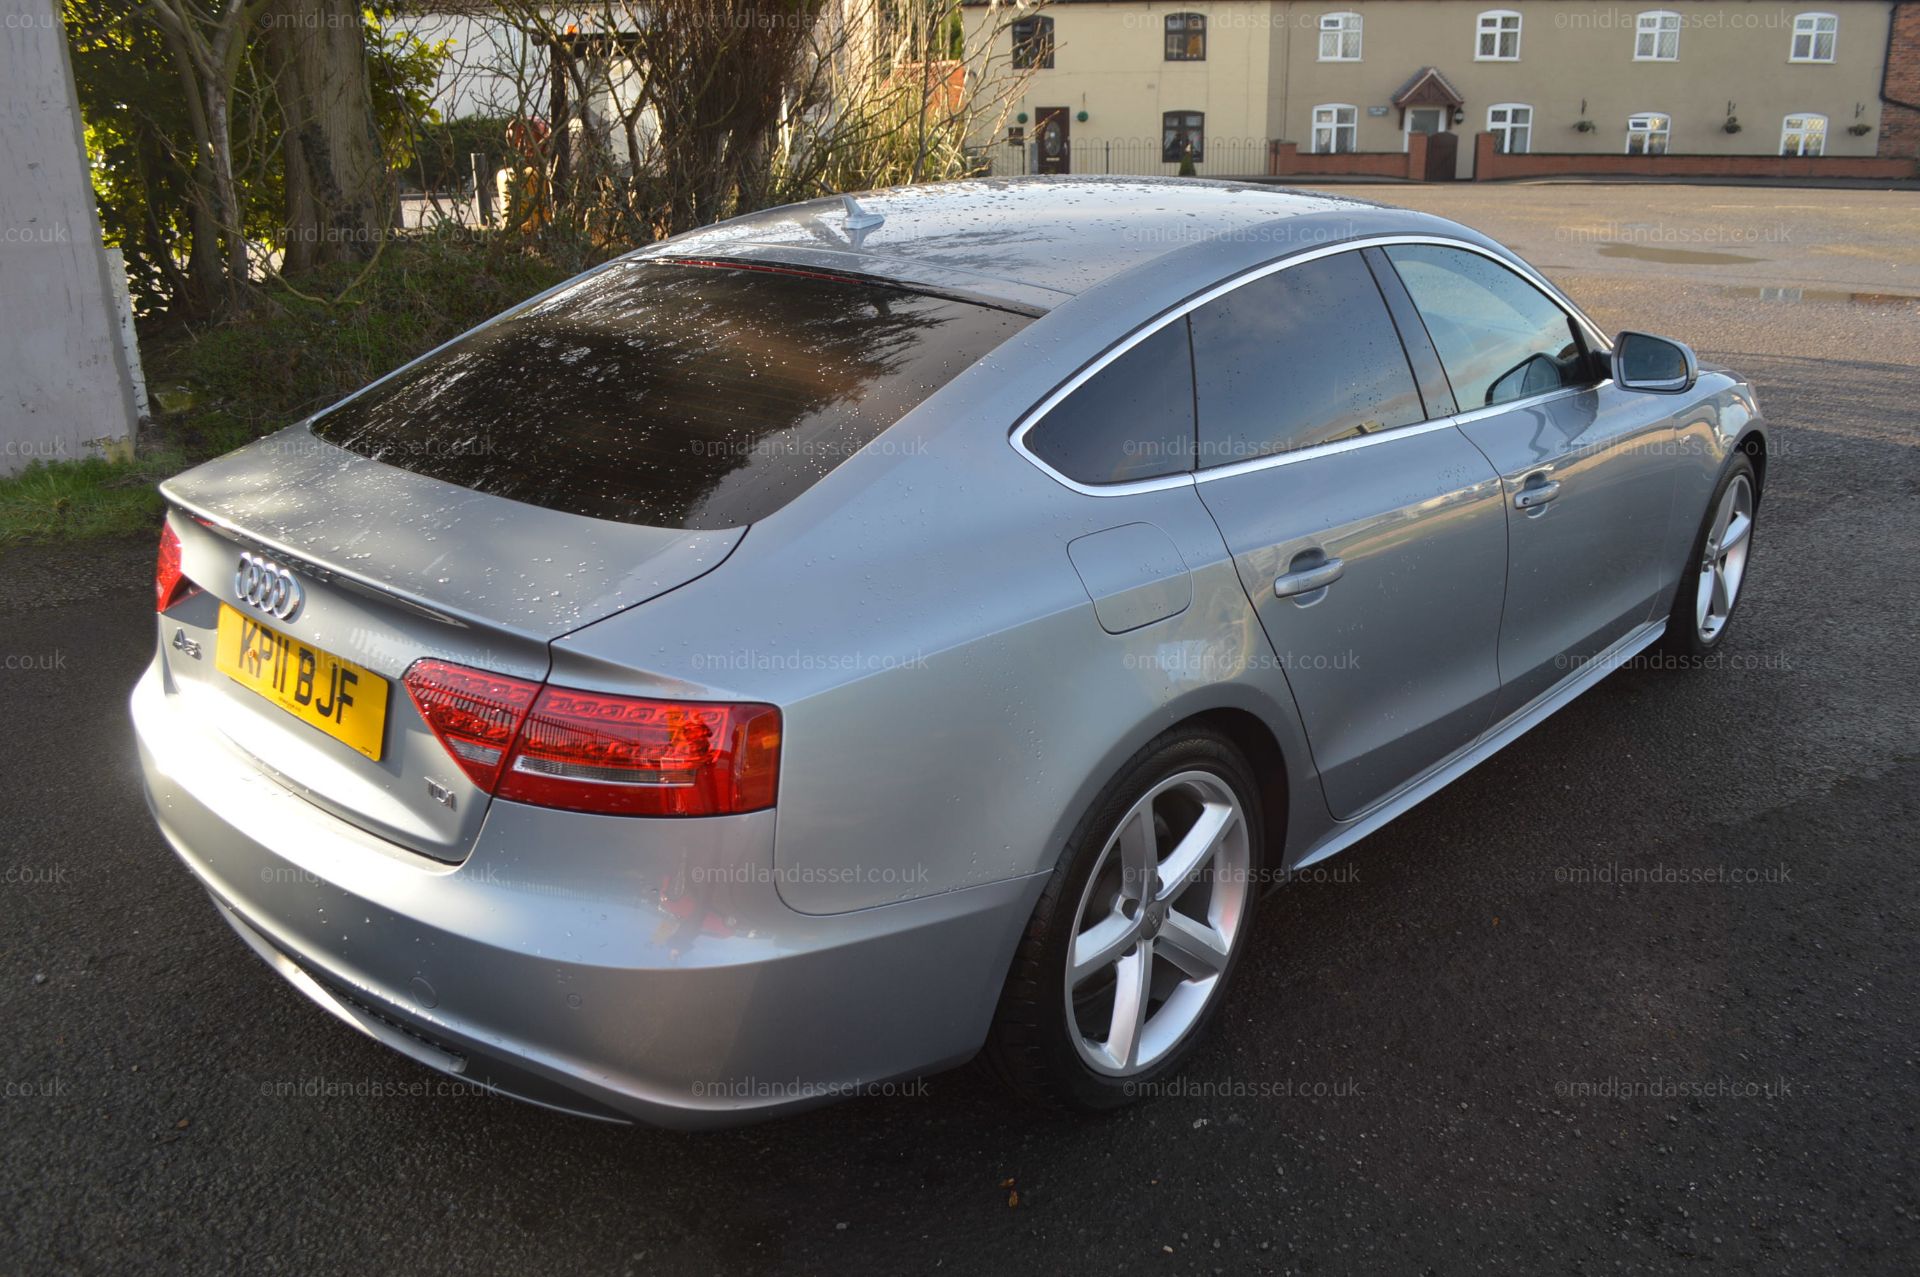 NR - 2011/11 REG AUDI A5 S LINE TDI, SERVICE HISTORY, 2 FORMER KEEPERS - Image 5 of 28